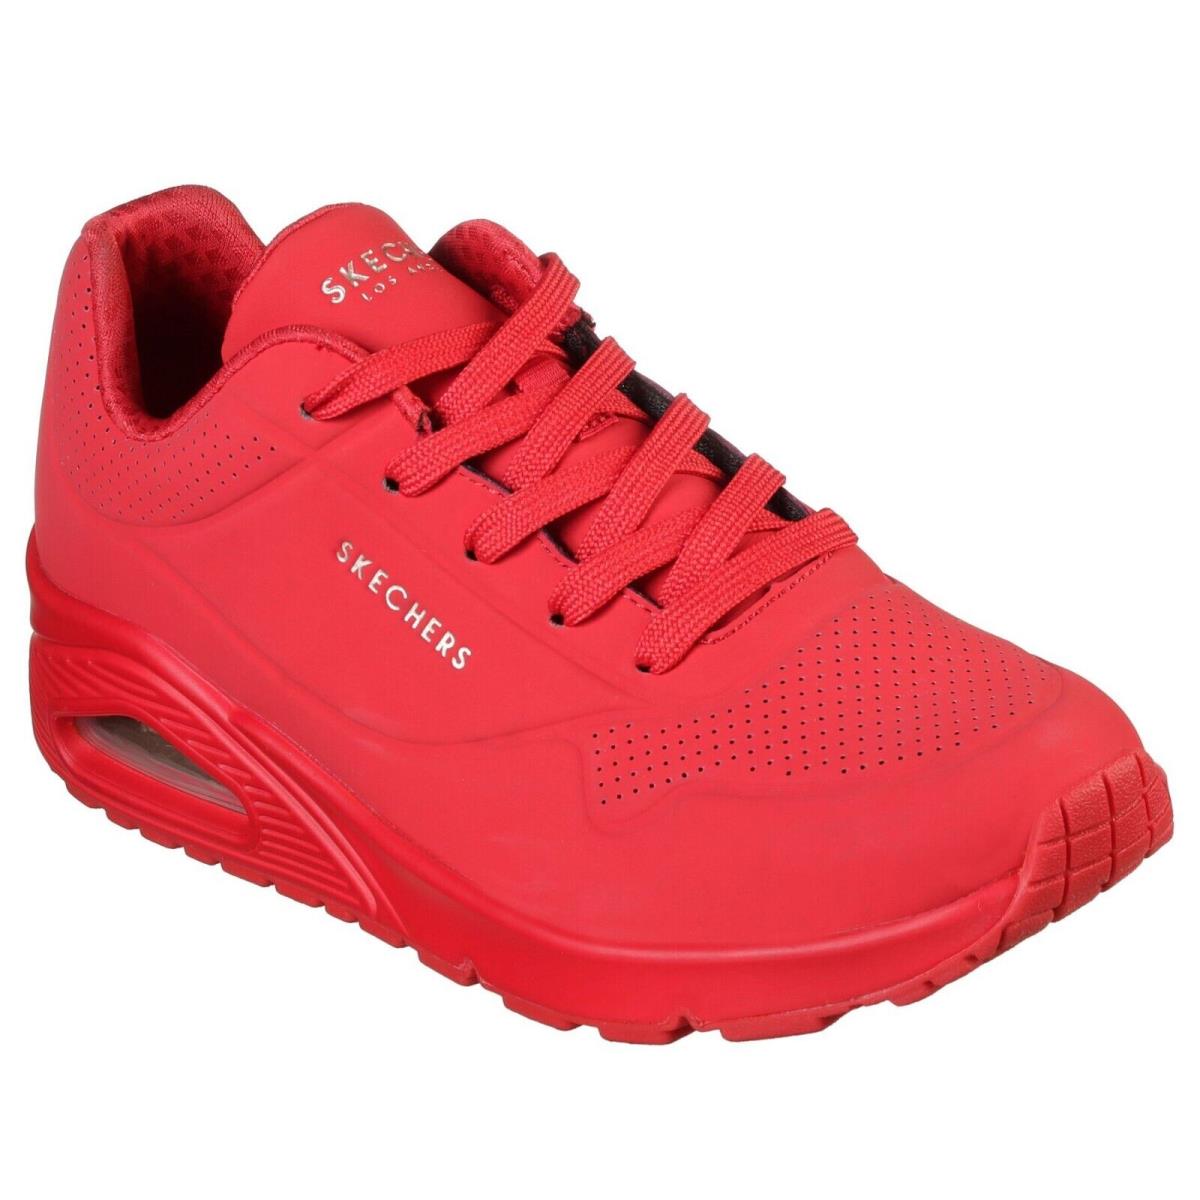 Skechers shoes  - Red 5